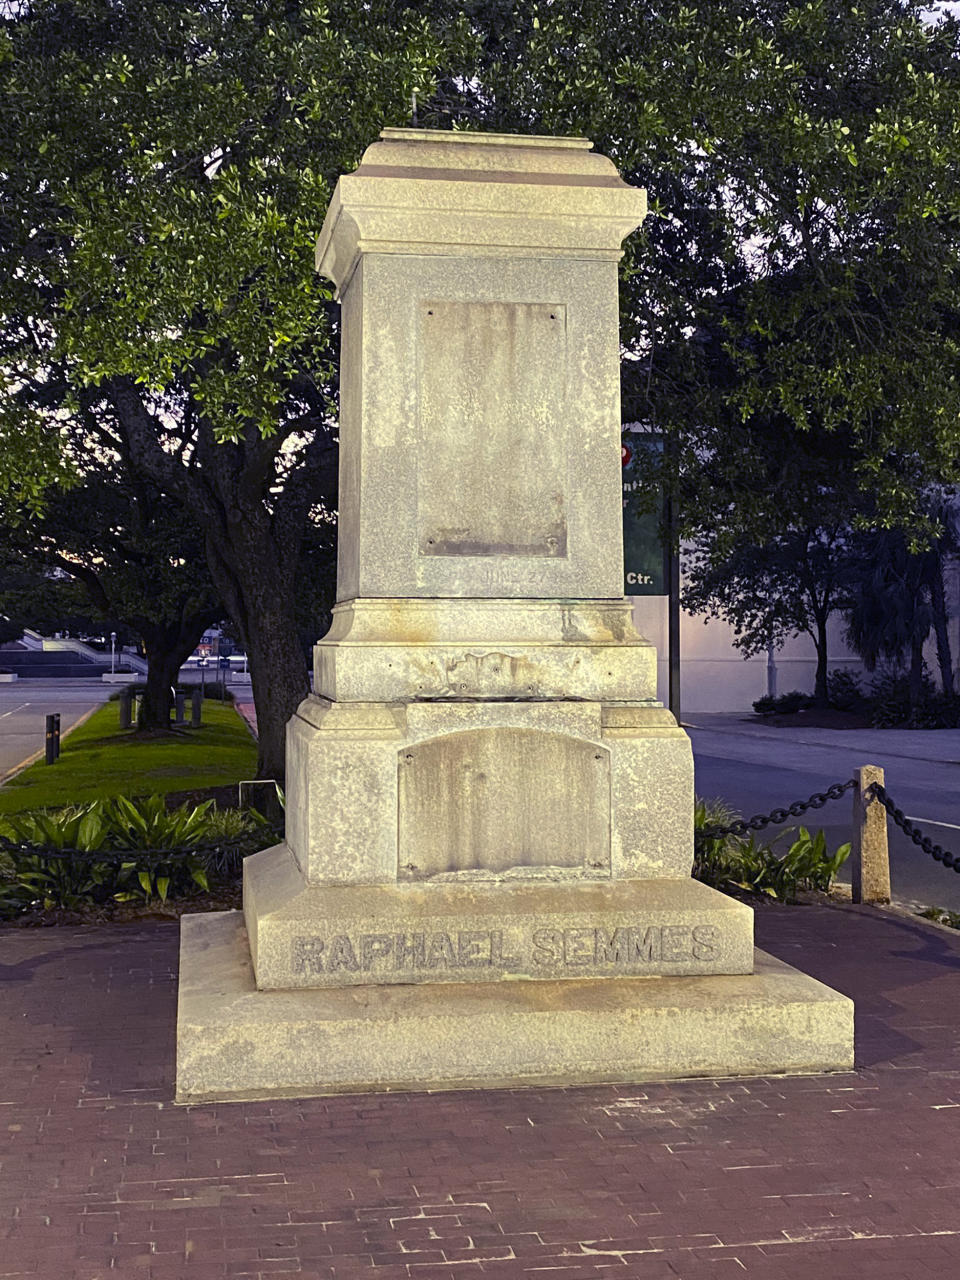 The pedestal where the statue of Admiral Raphael Semmes stands empty, early Friday, June 5, 2020 in Mobile, Ala. The city of Mobile  removed the Confederate statue early Friday, without making any public announcements. (WMPI-TV via AP)